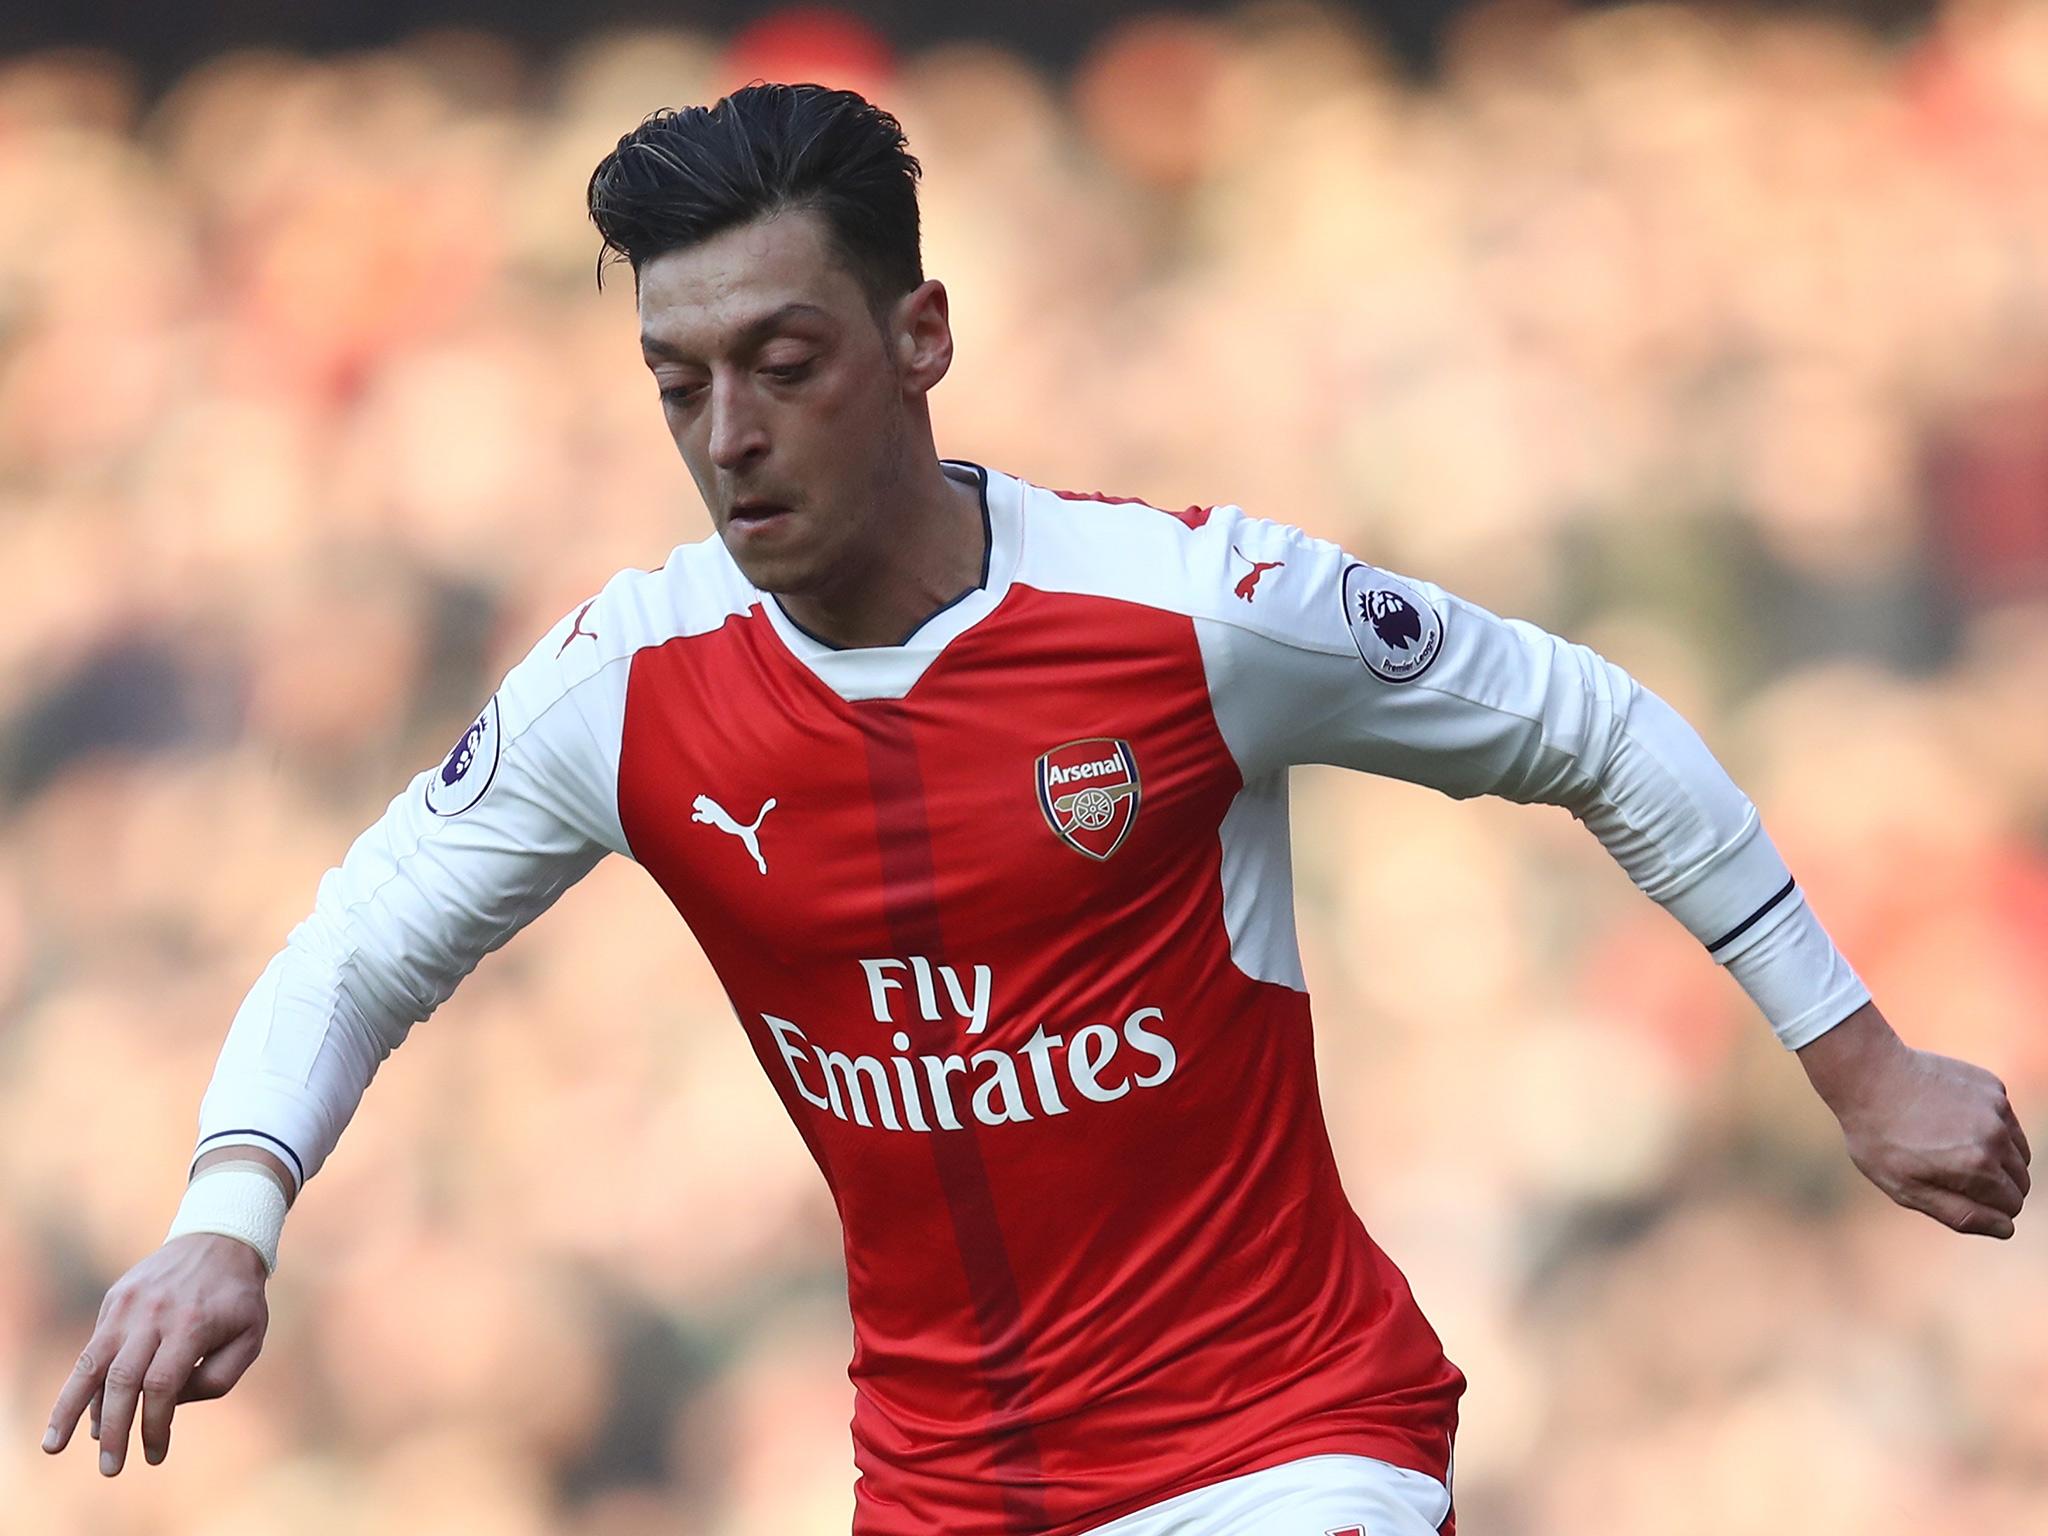 Ozil has struggled for form and confidence in recent weeks